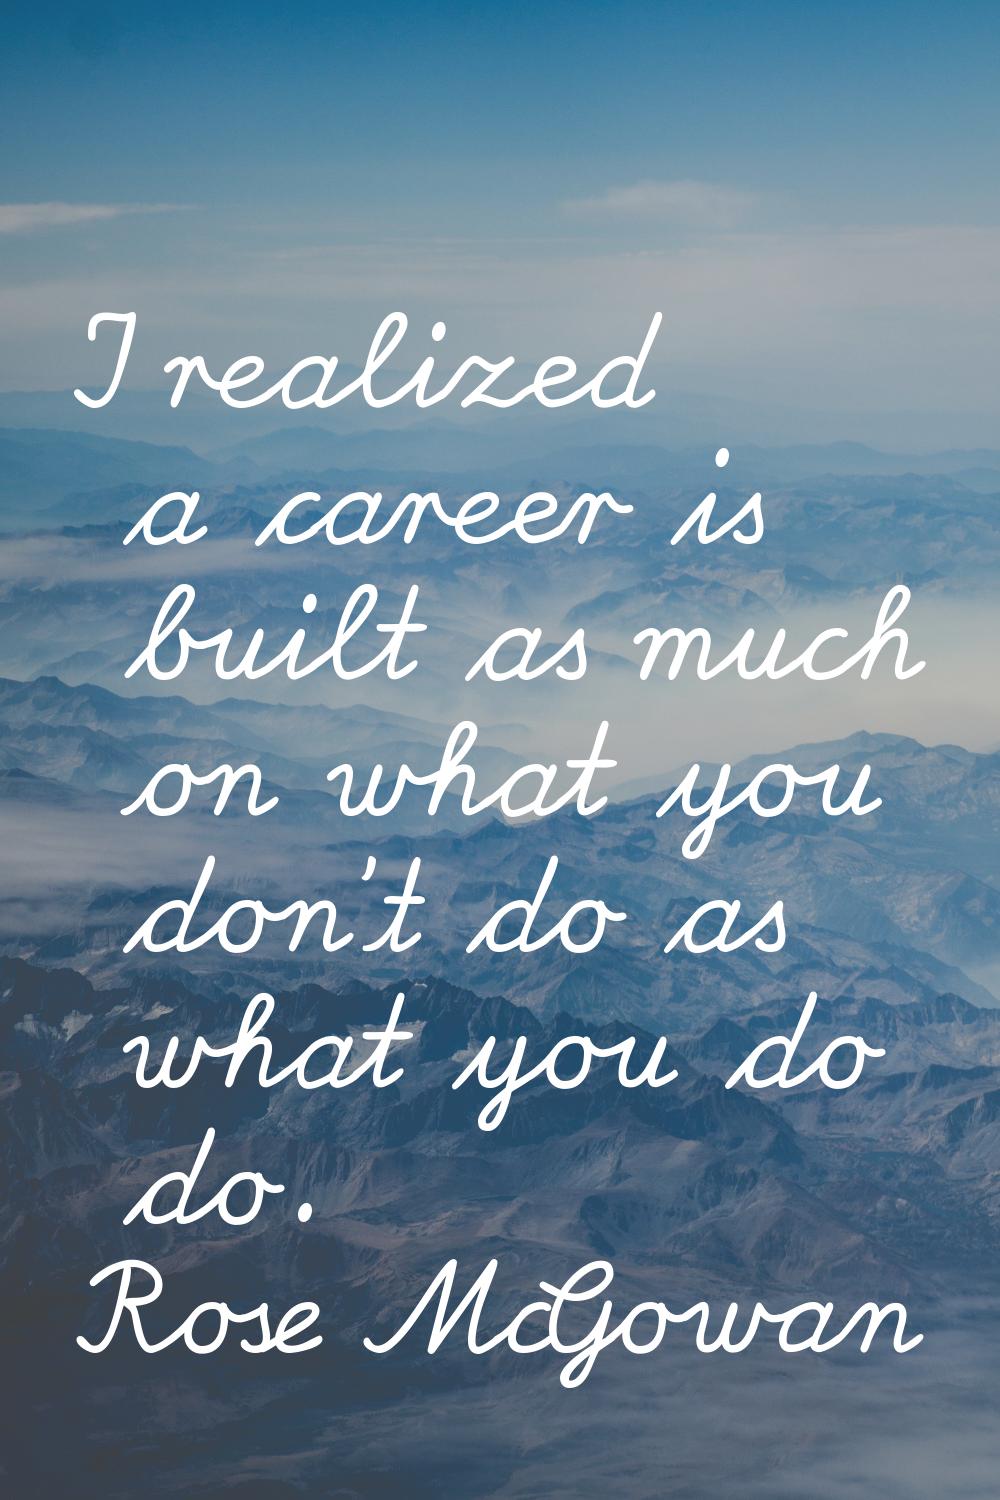 I realized a career is built as much on what you don't do as what you do do.